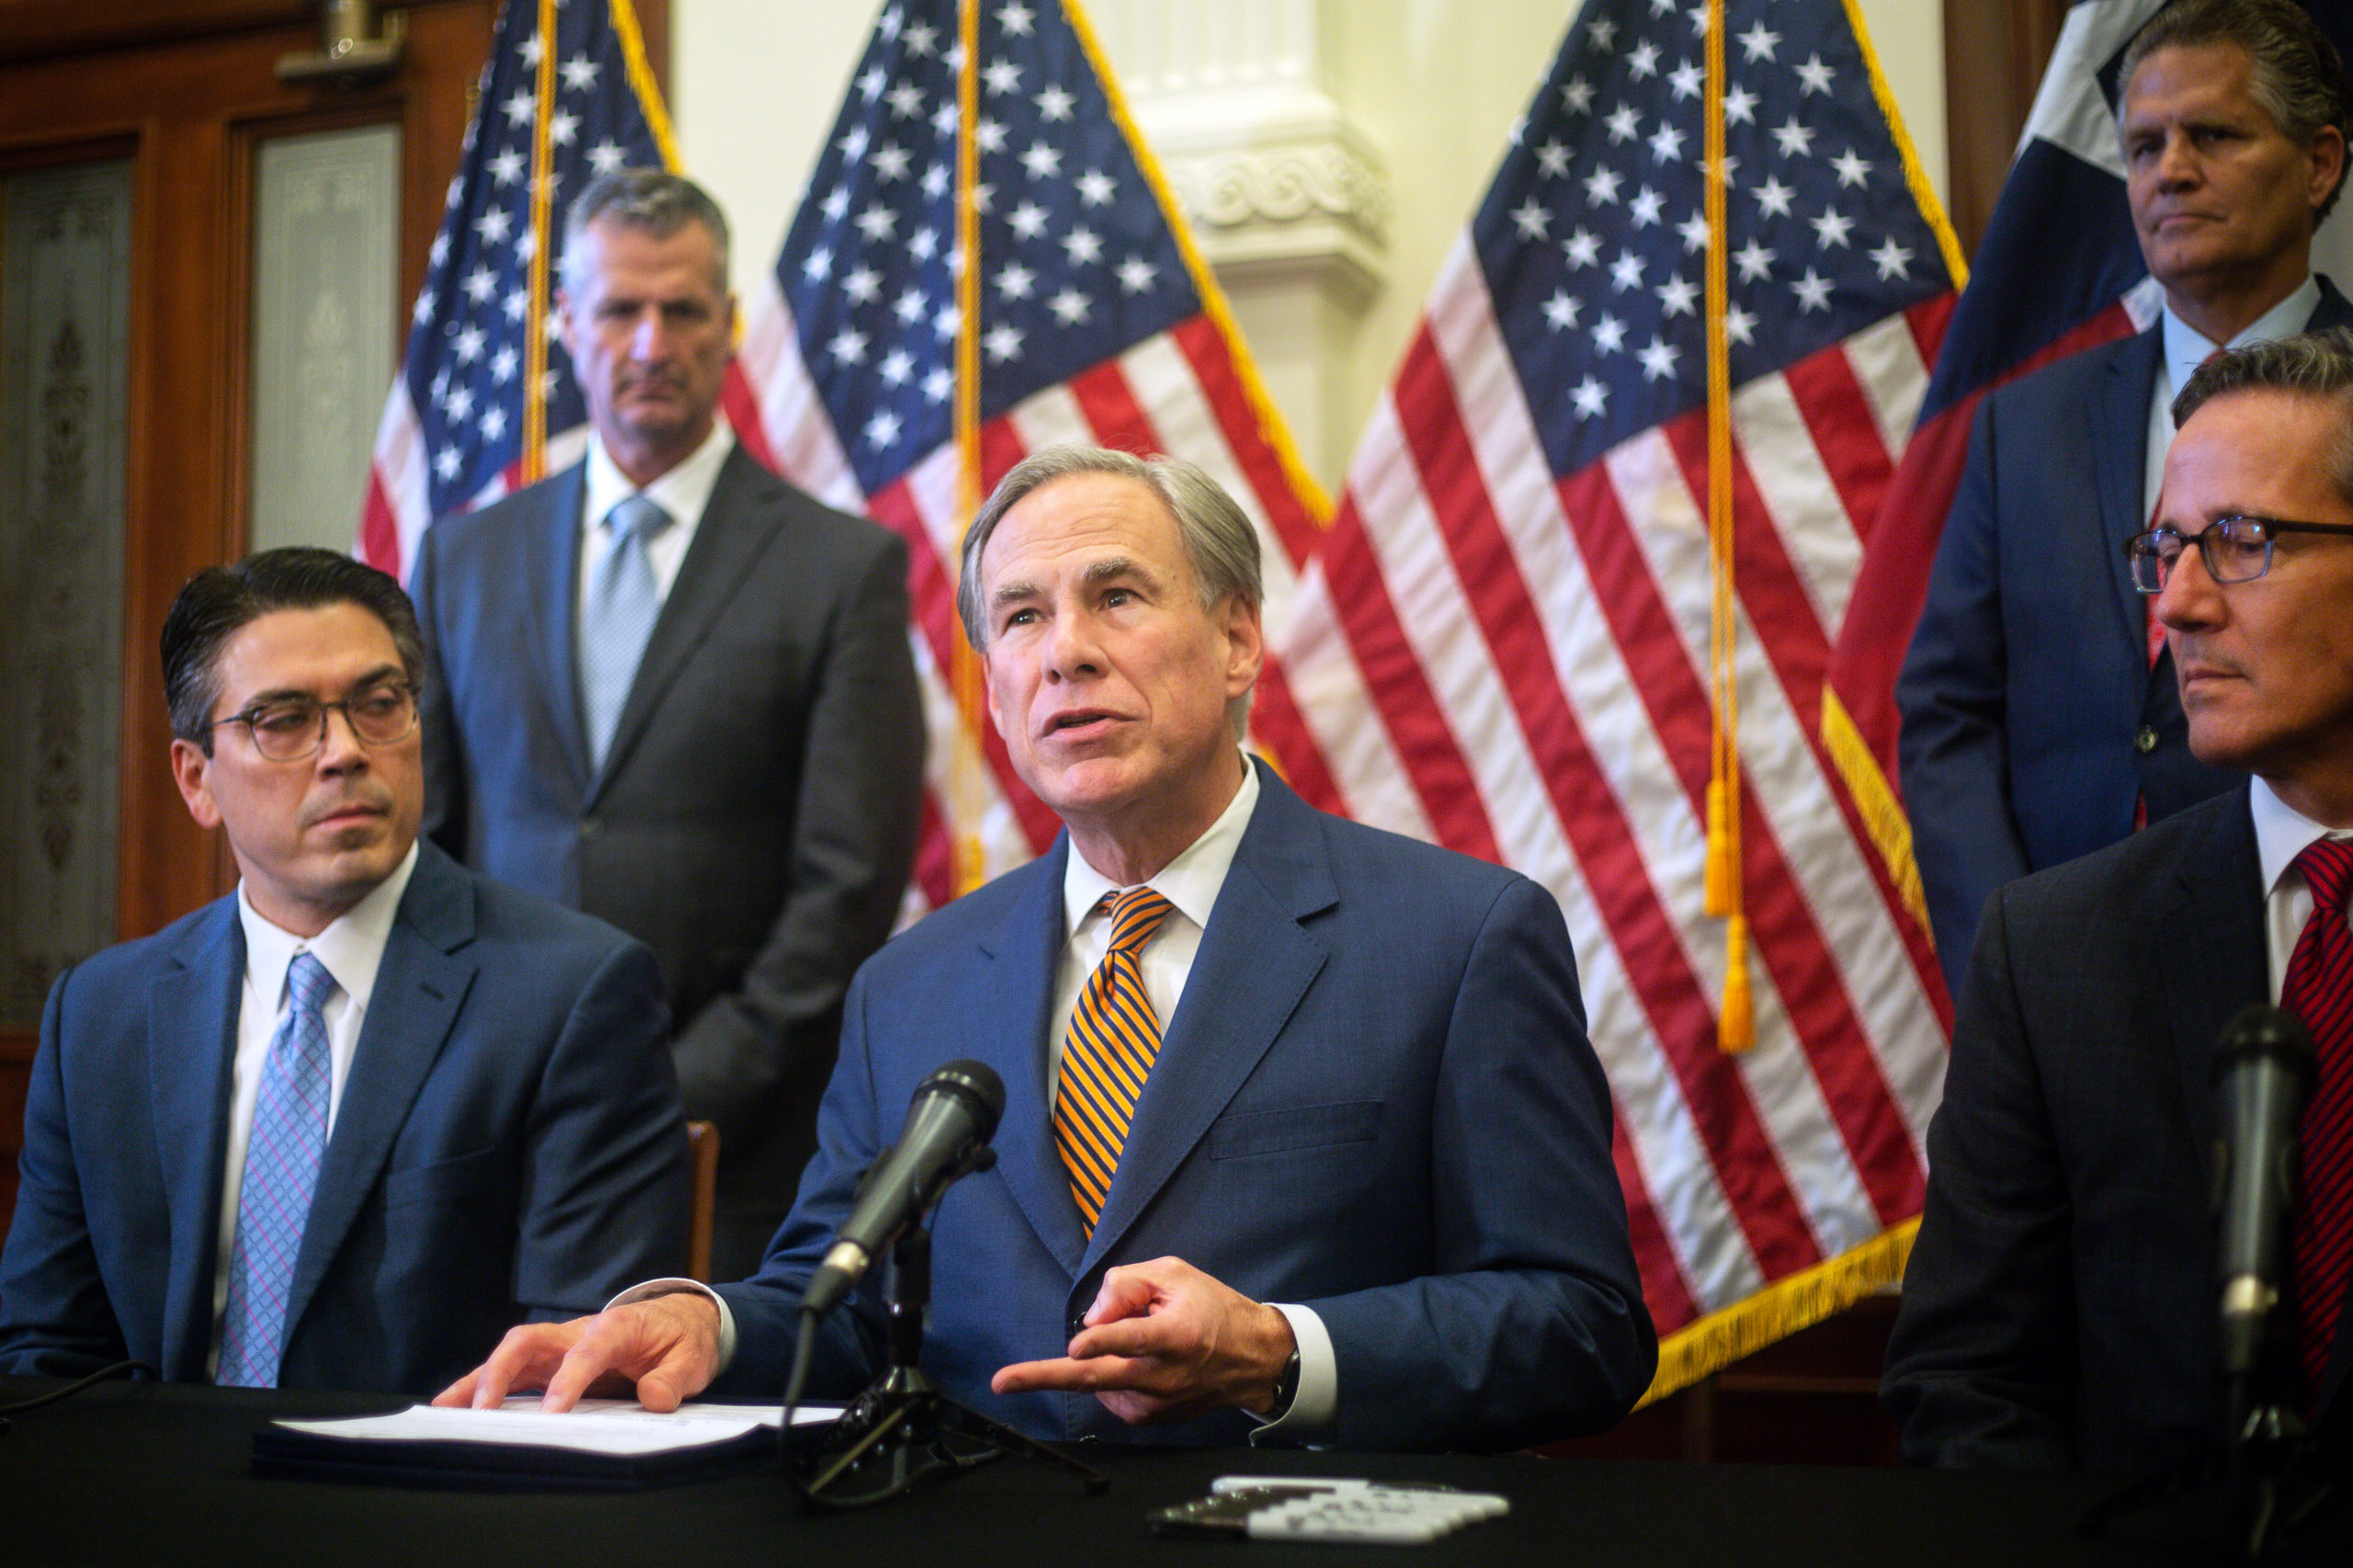 AUSTIN, TX - JUNE 08: (L-R) State Rep. Chris Paddie, Texas Governor Greg Abbott and State Senator Kelly Hancock attend a press conference where Abbott signed Senate Bills 2 and 3 at the Capitol on June 8, 2021 in Austin, Texas. Governor Abbott signed the bills into law to reform the Electric Reliability Council of Texas and weatherize and improve the reliability of the state's power grid. The bill signing comes months after a disastrous February winter storm that caused widespread power outages and left dozens of Texans dead. (Photo by Montinique Monroe/Getty Images)